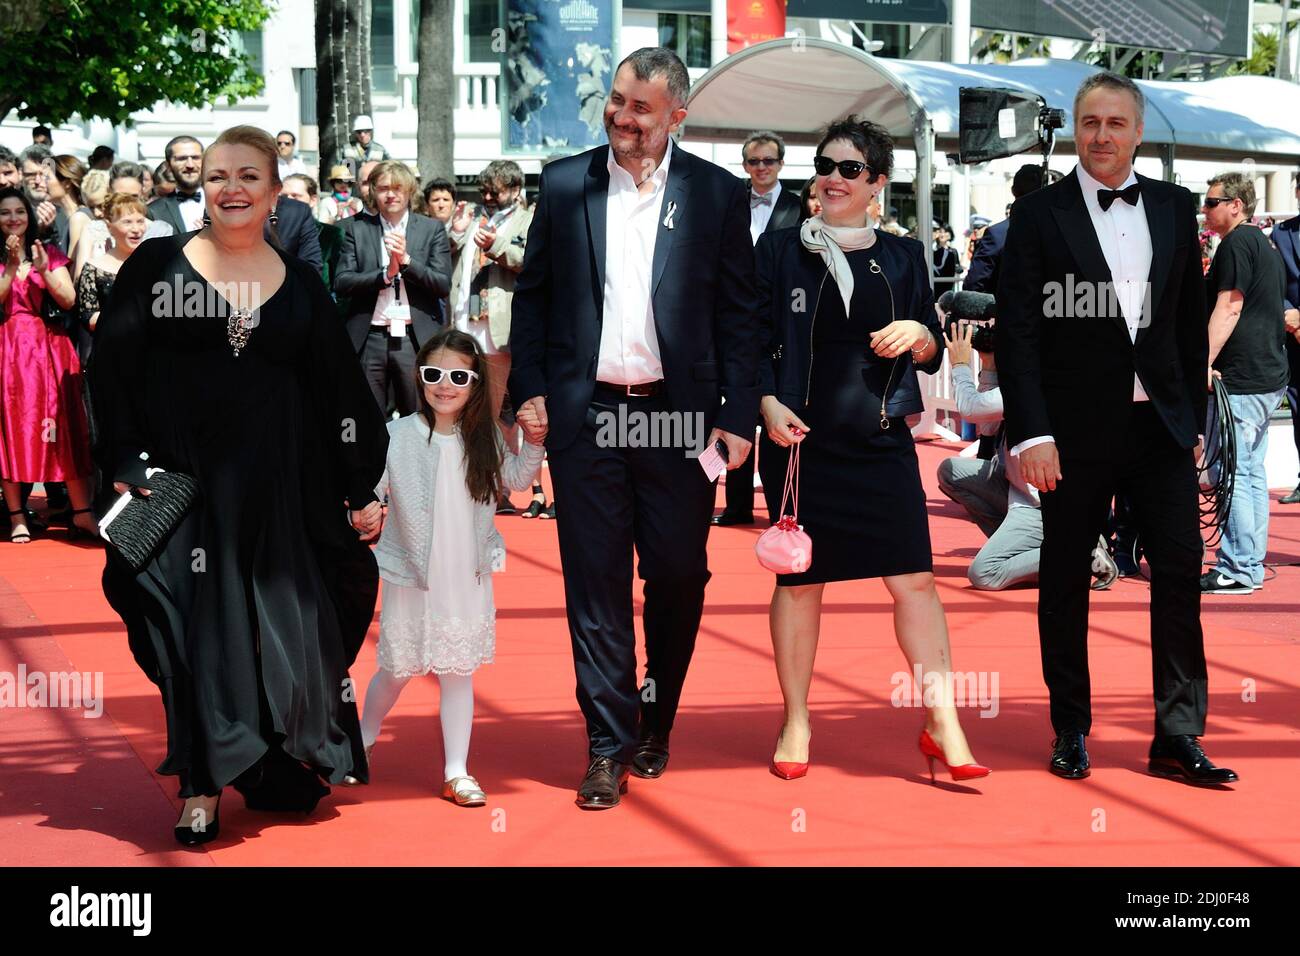 Cristi Puiu, Zoe Puiu, Anca Puiu, Dana Dogaru and Mimi Branescu attending the 'Sieranevada' Screening at the Palais Des Festivals in Cannes, France on May 12, 2016, as part of the 69th Cannes Film Festival. Photo by Aurore Marechal/ABACAPRESS.COM Stock Photo